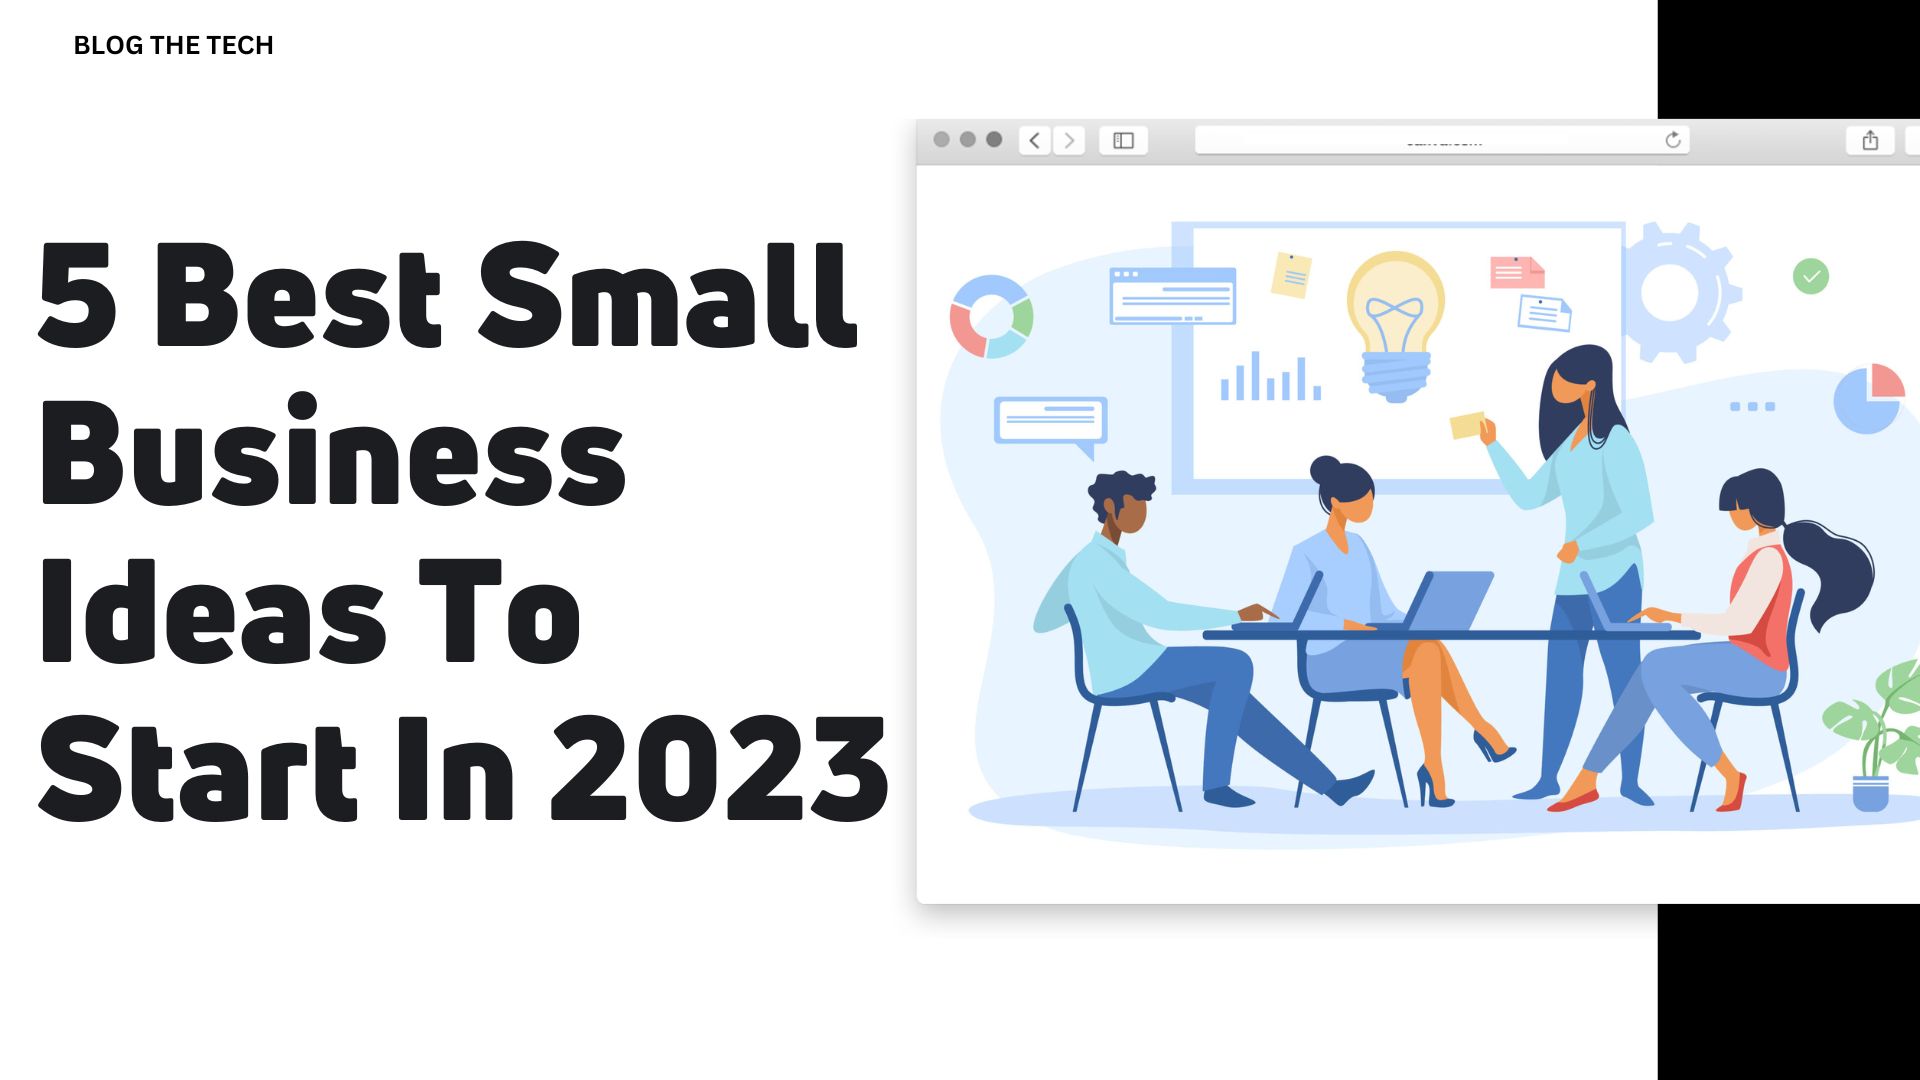 5 Best Small Business Ideas To Start In 2023 